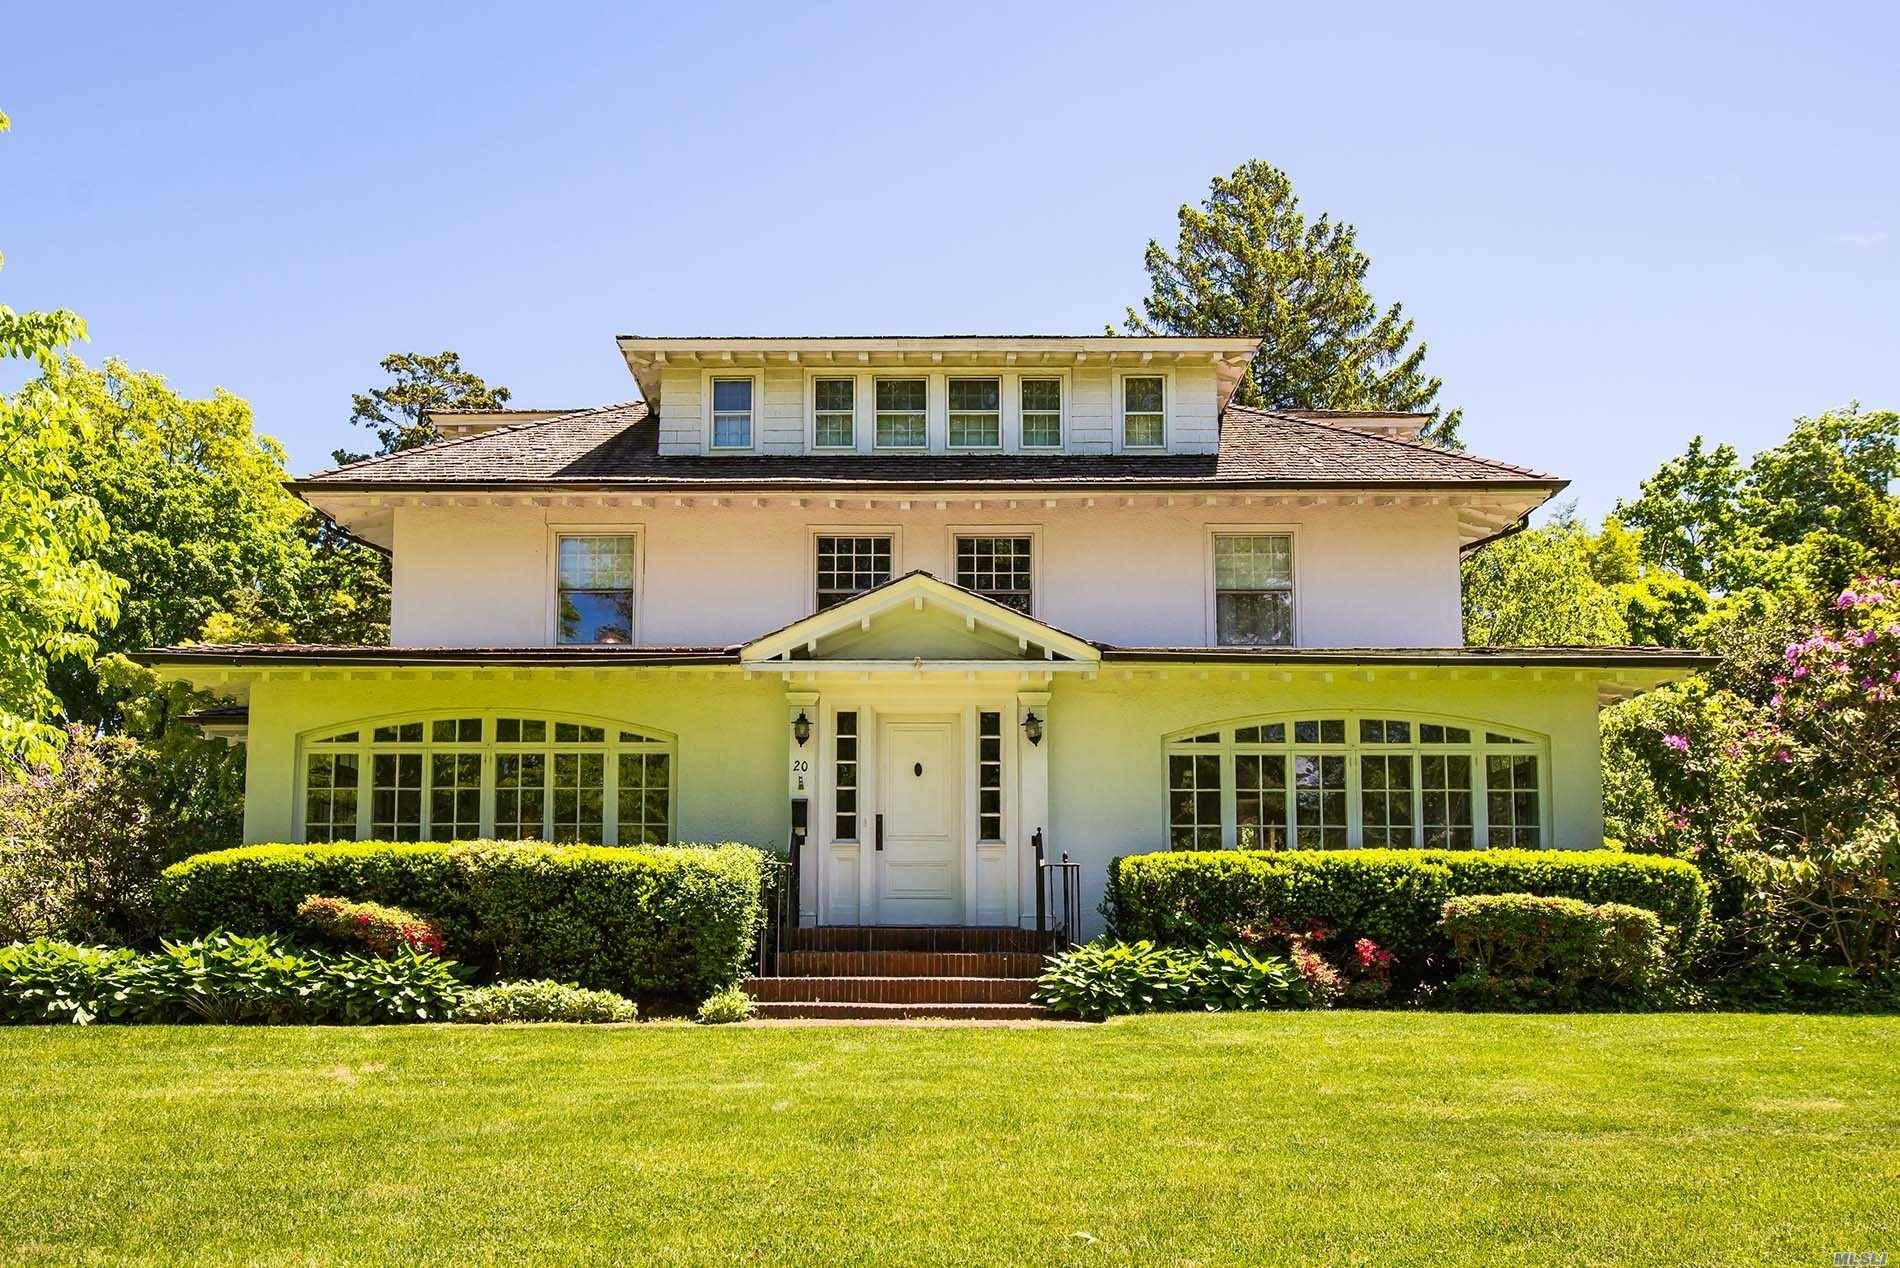 Grand and gracious, this turn of the Century home boasts exquisite original detail.